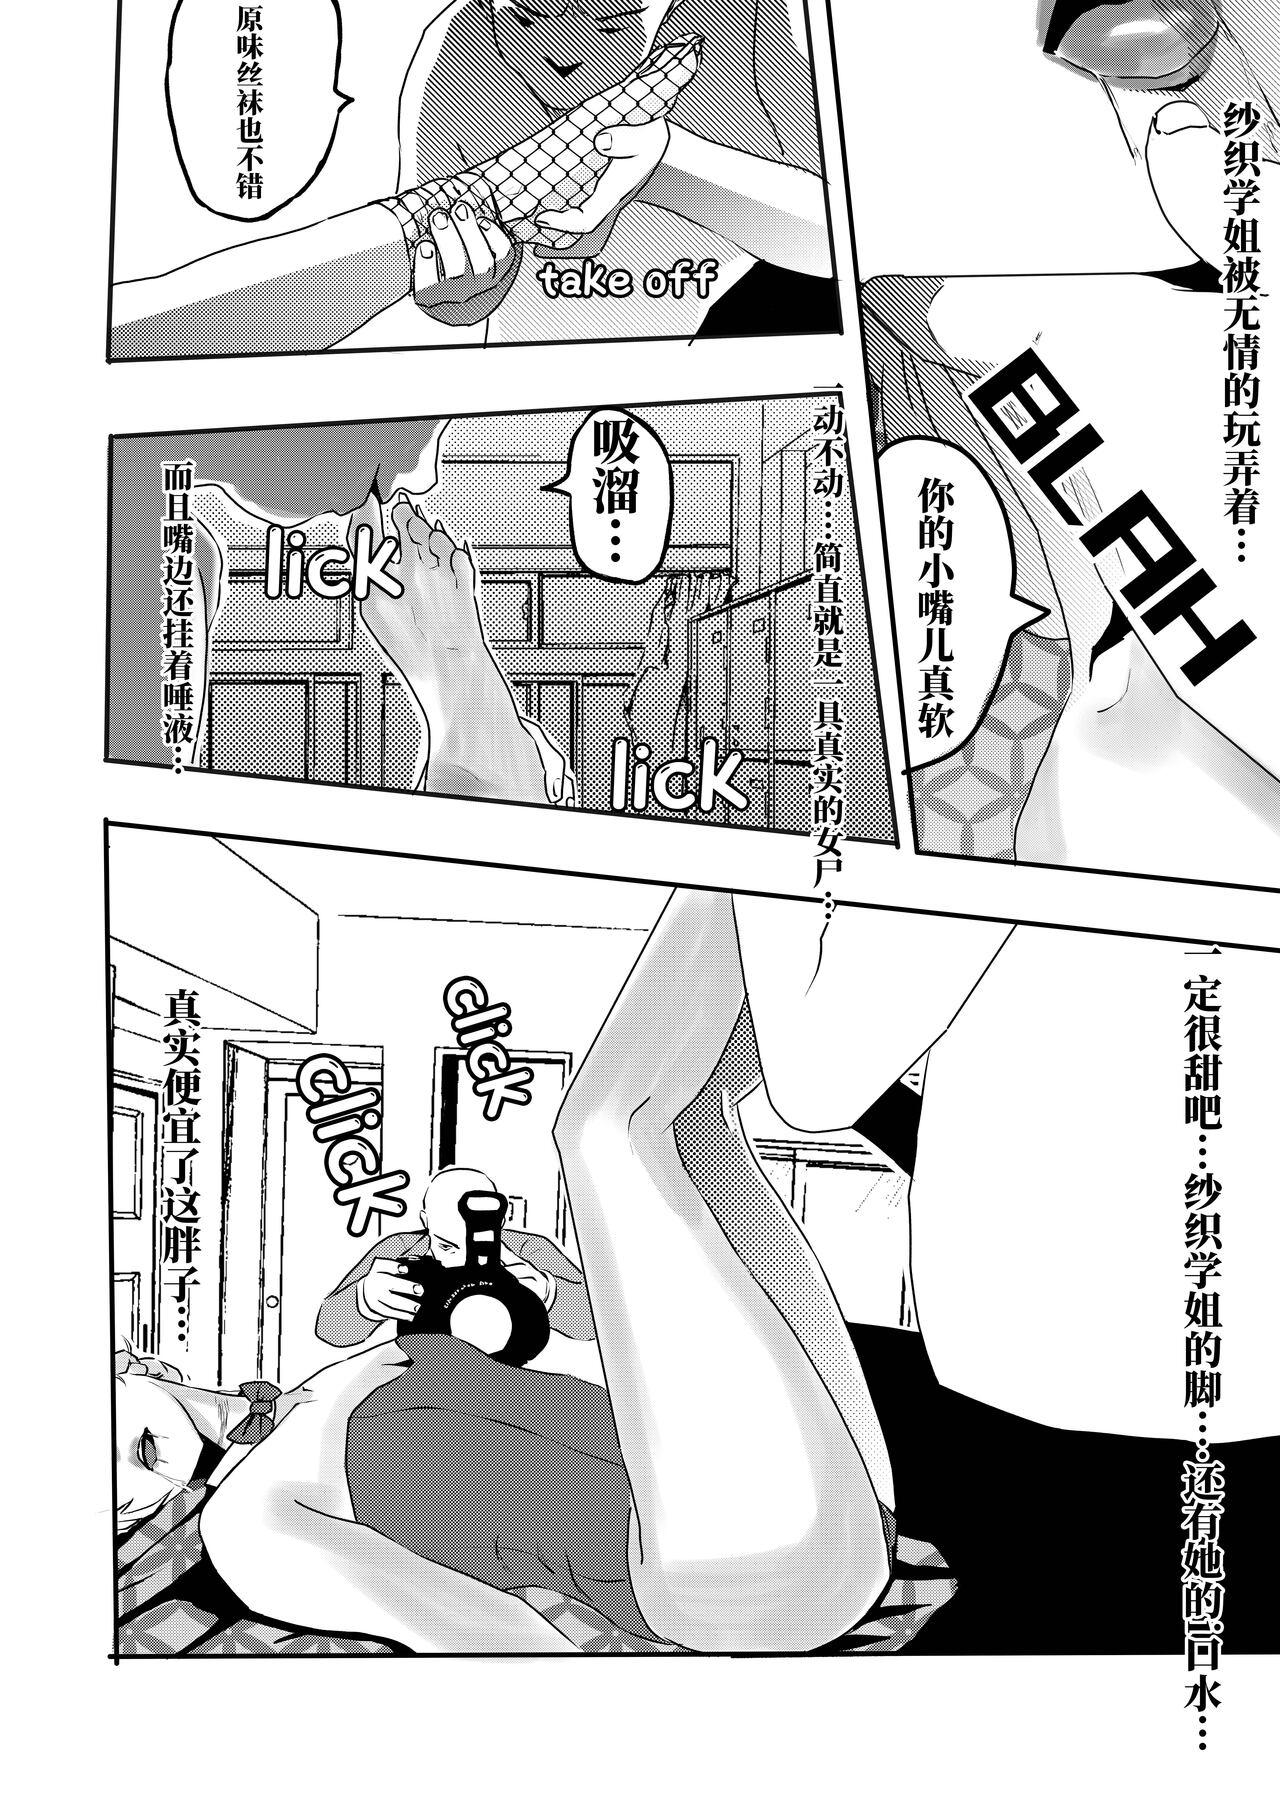 [KAO.YELLOW STUDIO (T.C.X)] I must be out of my mind to fall in love with SAORI, the Snuff Queen Ch.1-16 | 想与冰恋女王纱织同学谈恋爱的我脑子一定有问题 第1-16话 [Chinese] 19